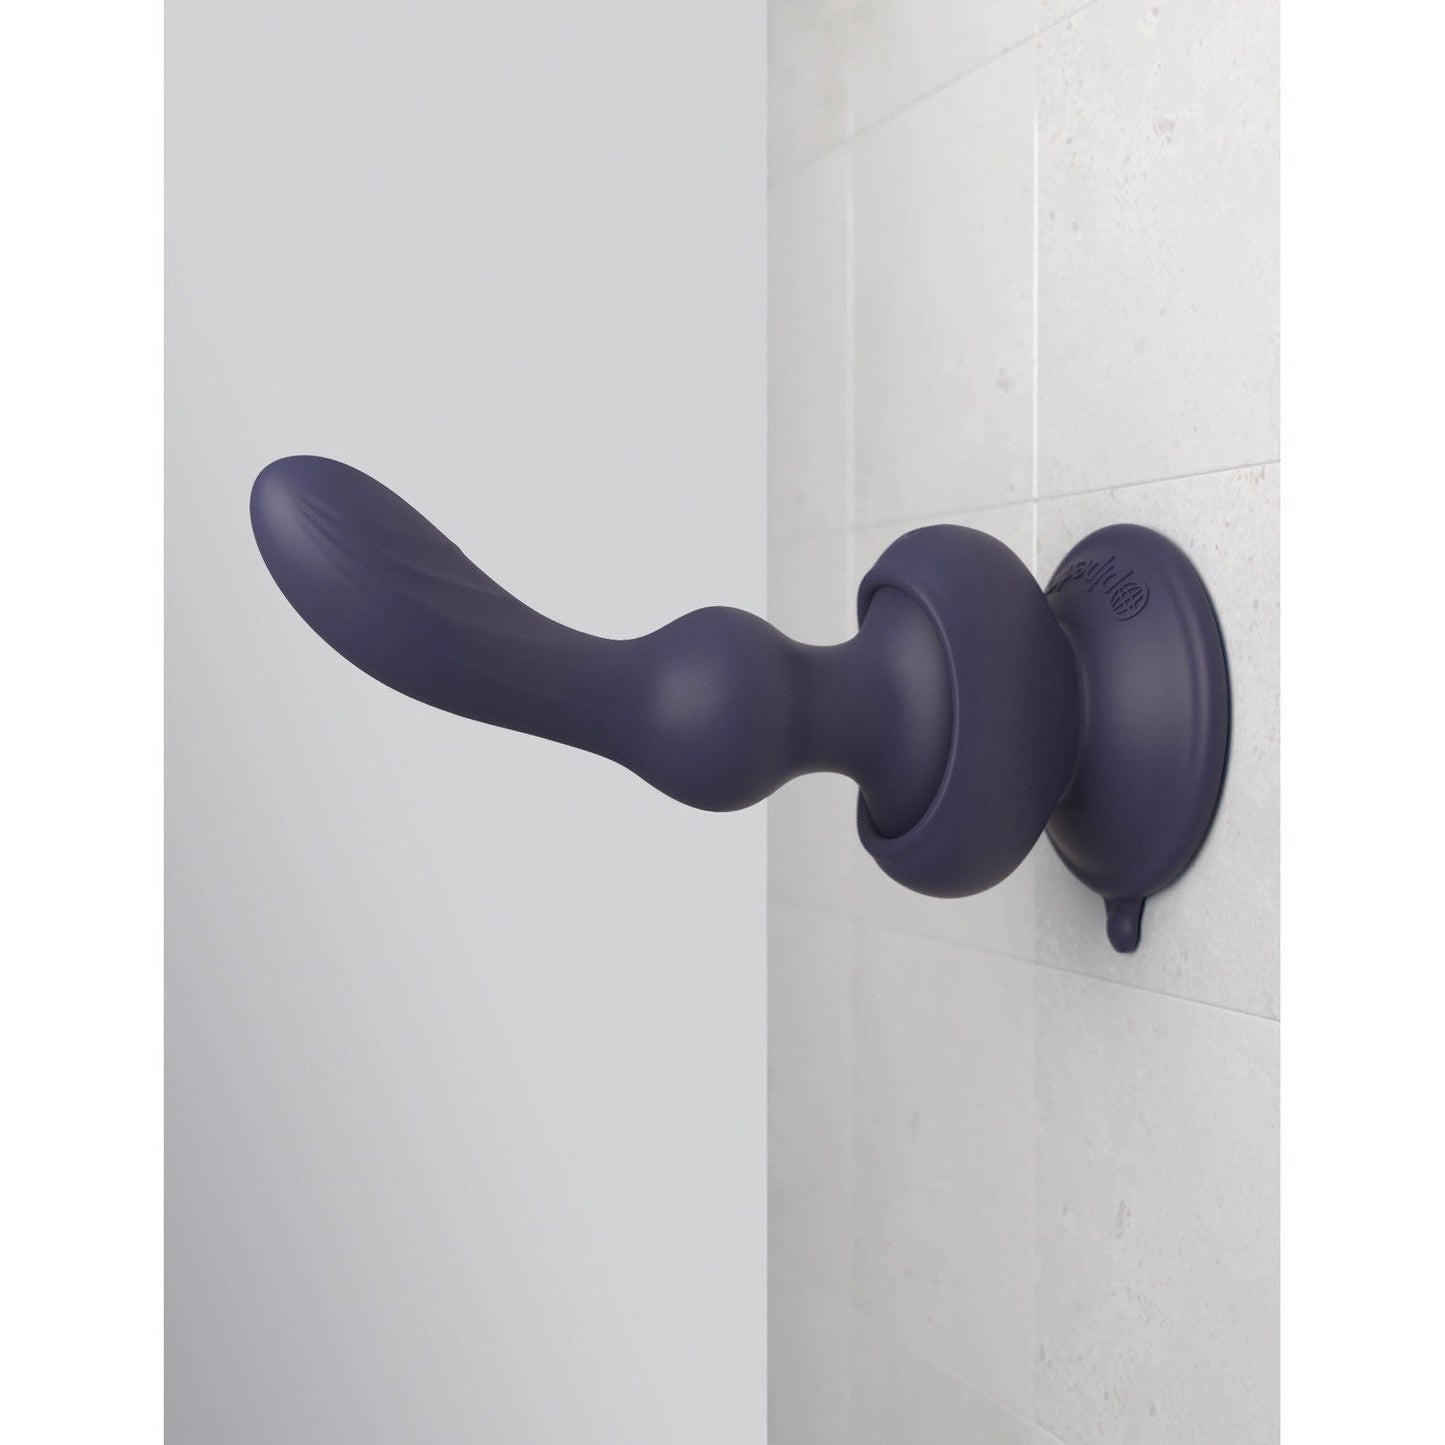 Wall Banger P-Spot - Blue USB Rechargeable Vibrating Prostate Massager with Remote